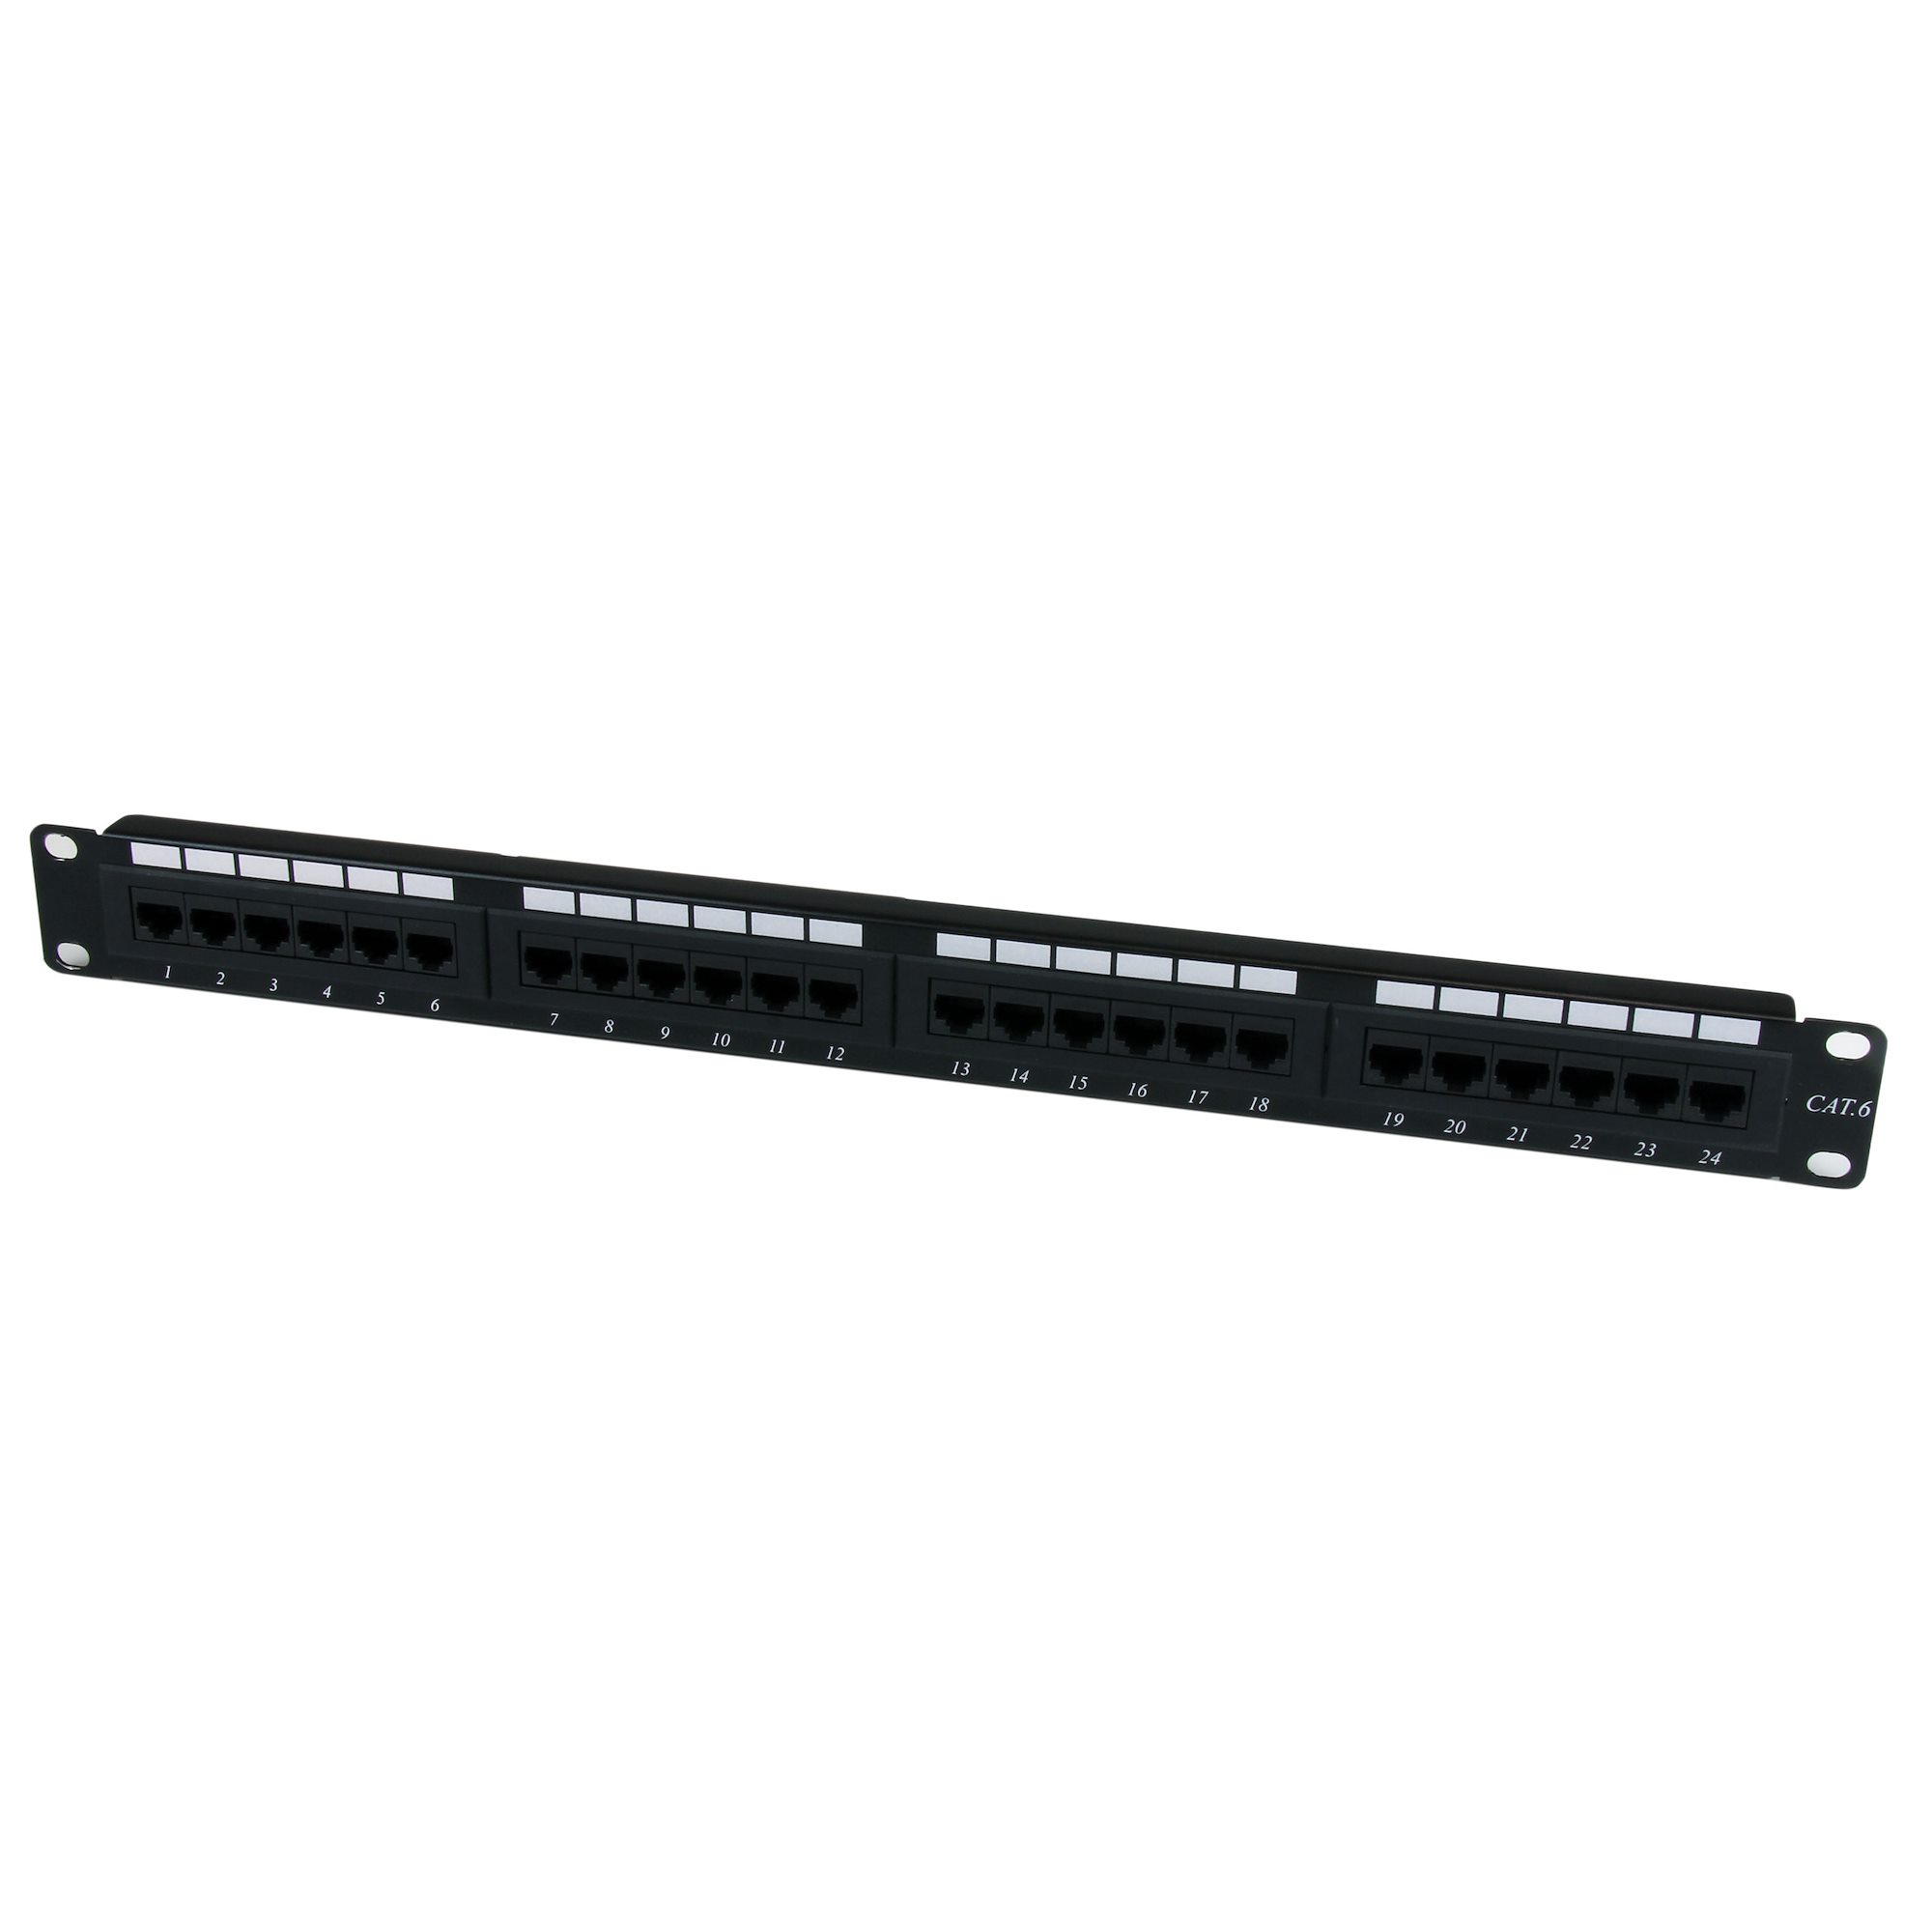 Cat6 Patch Panel 24 Port 19 Rack Mount, 1U - Infinity Cable Products